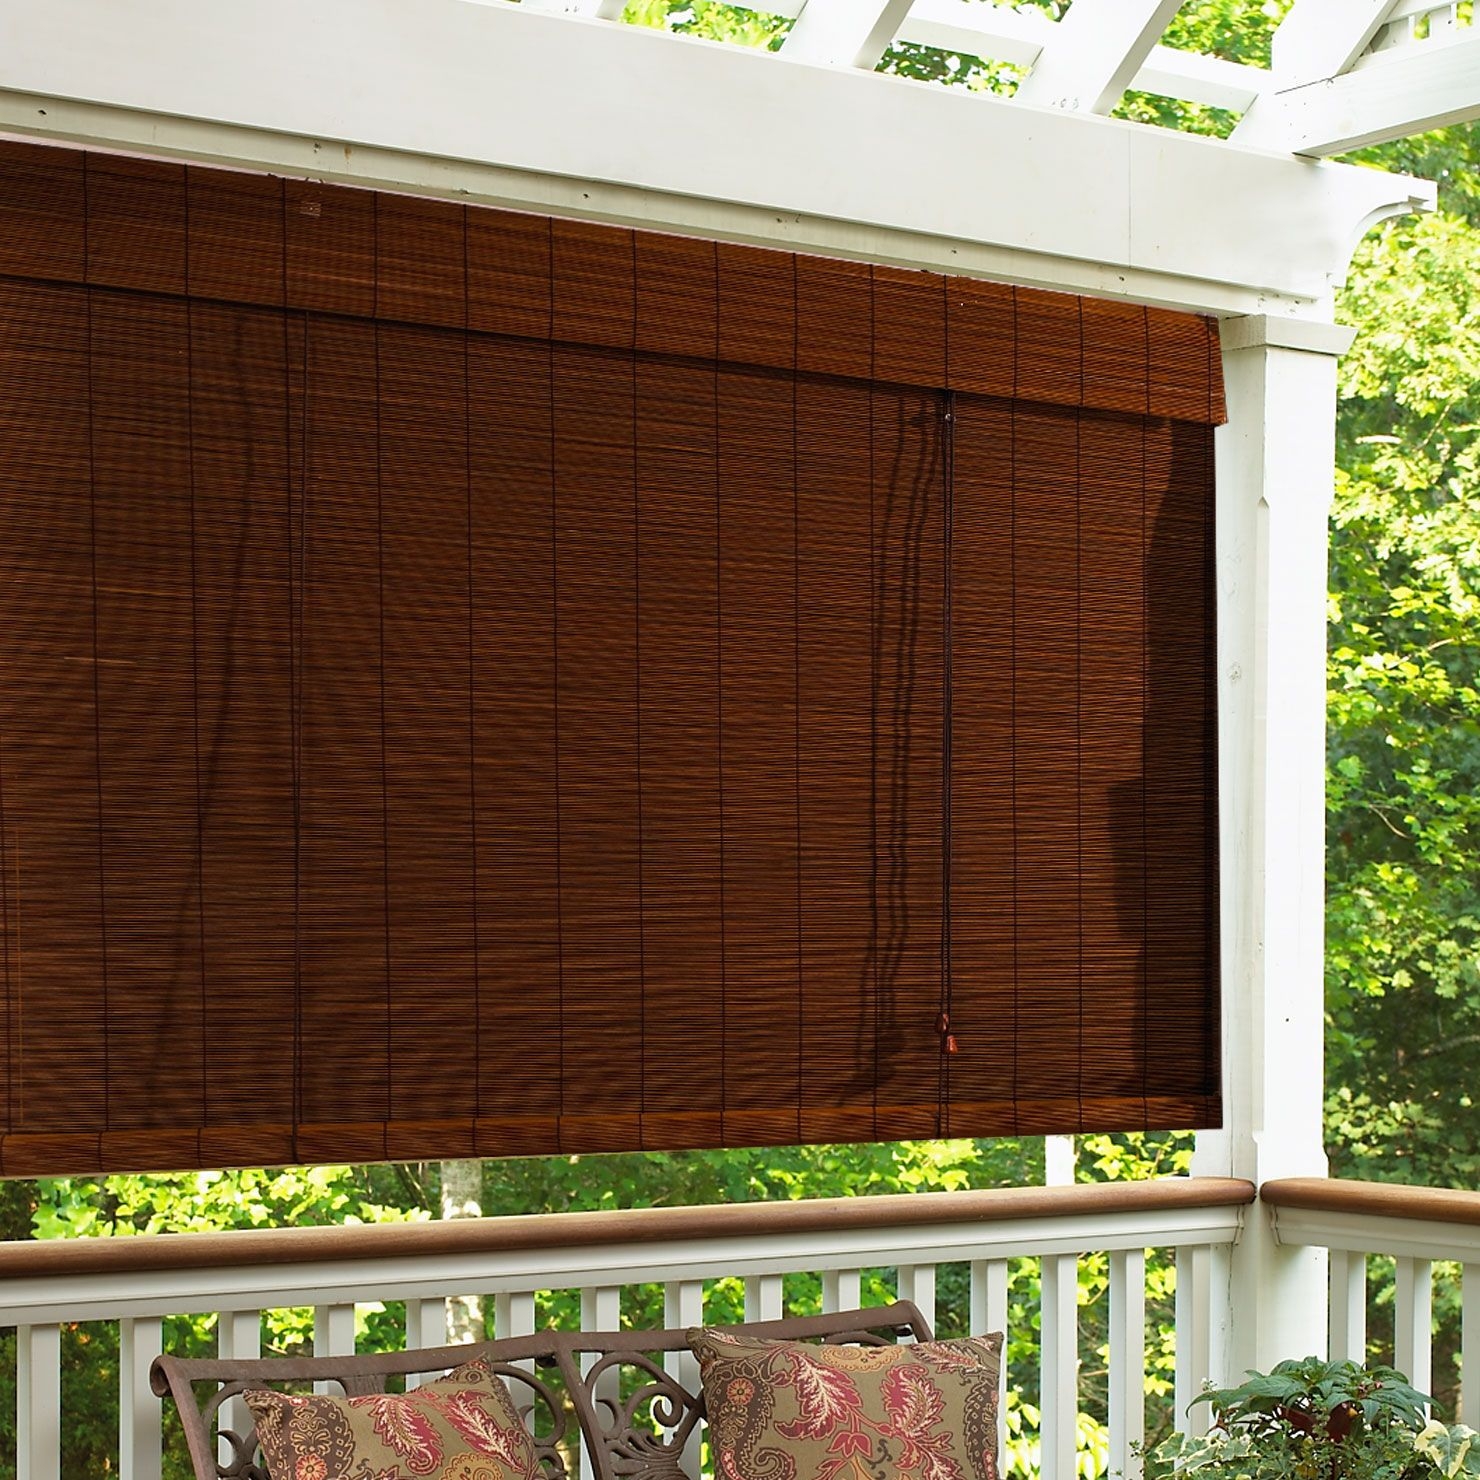 Outdoor Roll Up Bamboo Blinds Visualhunt, Large Outdoor Bamboo Shades For Patio